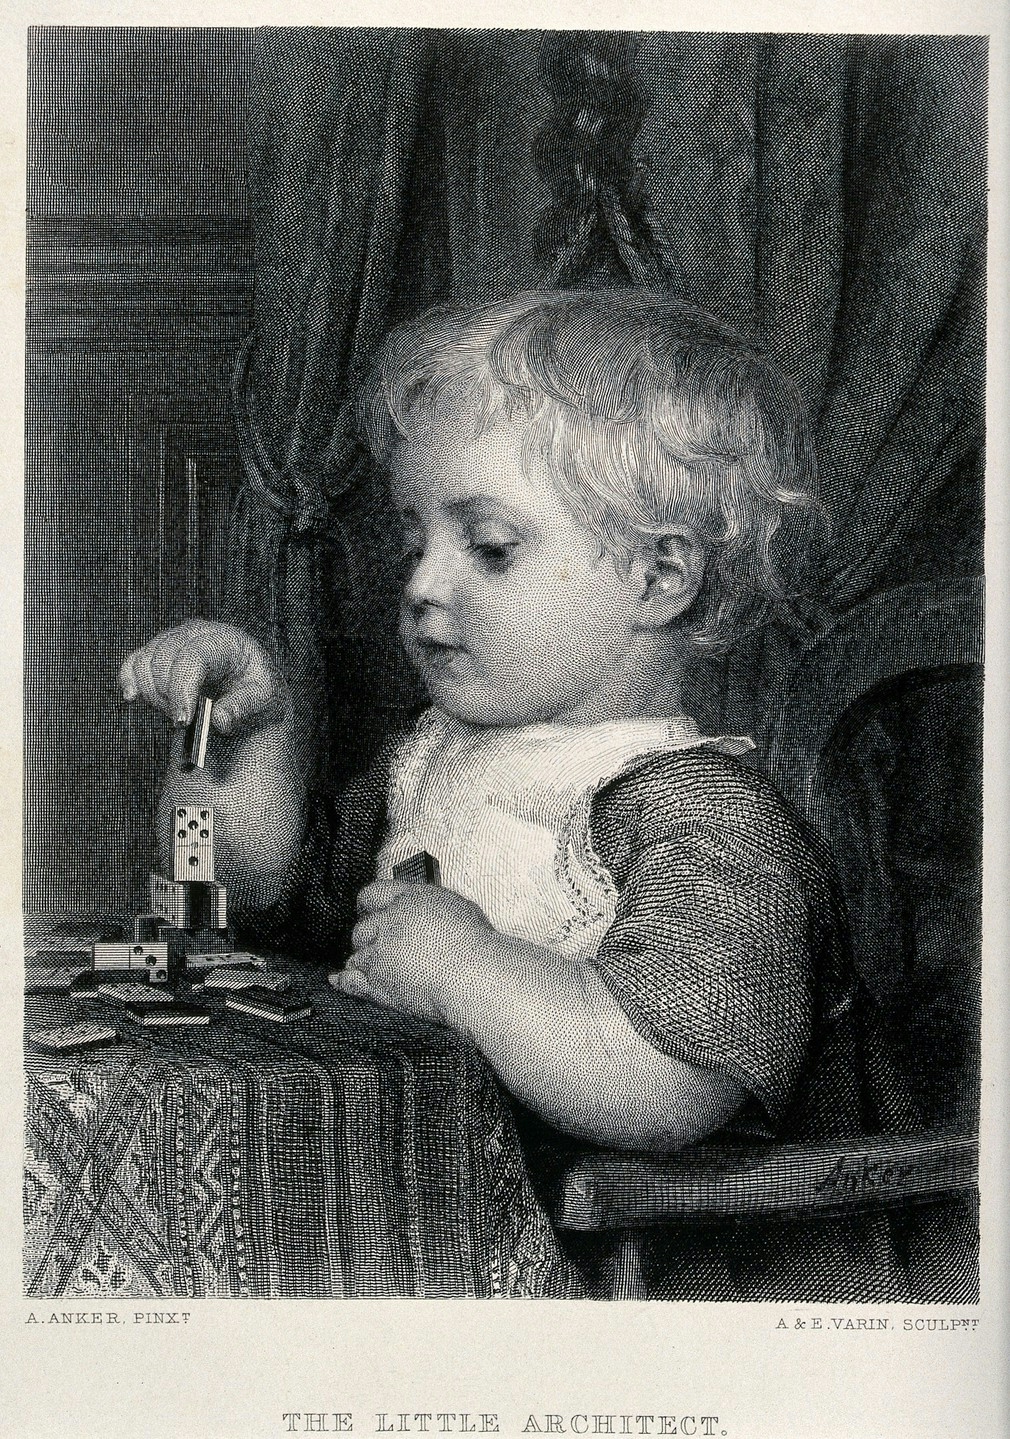 Monochrome etching of a young child sitting at a table using dominoes as building blocks